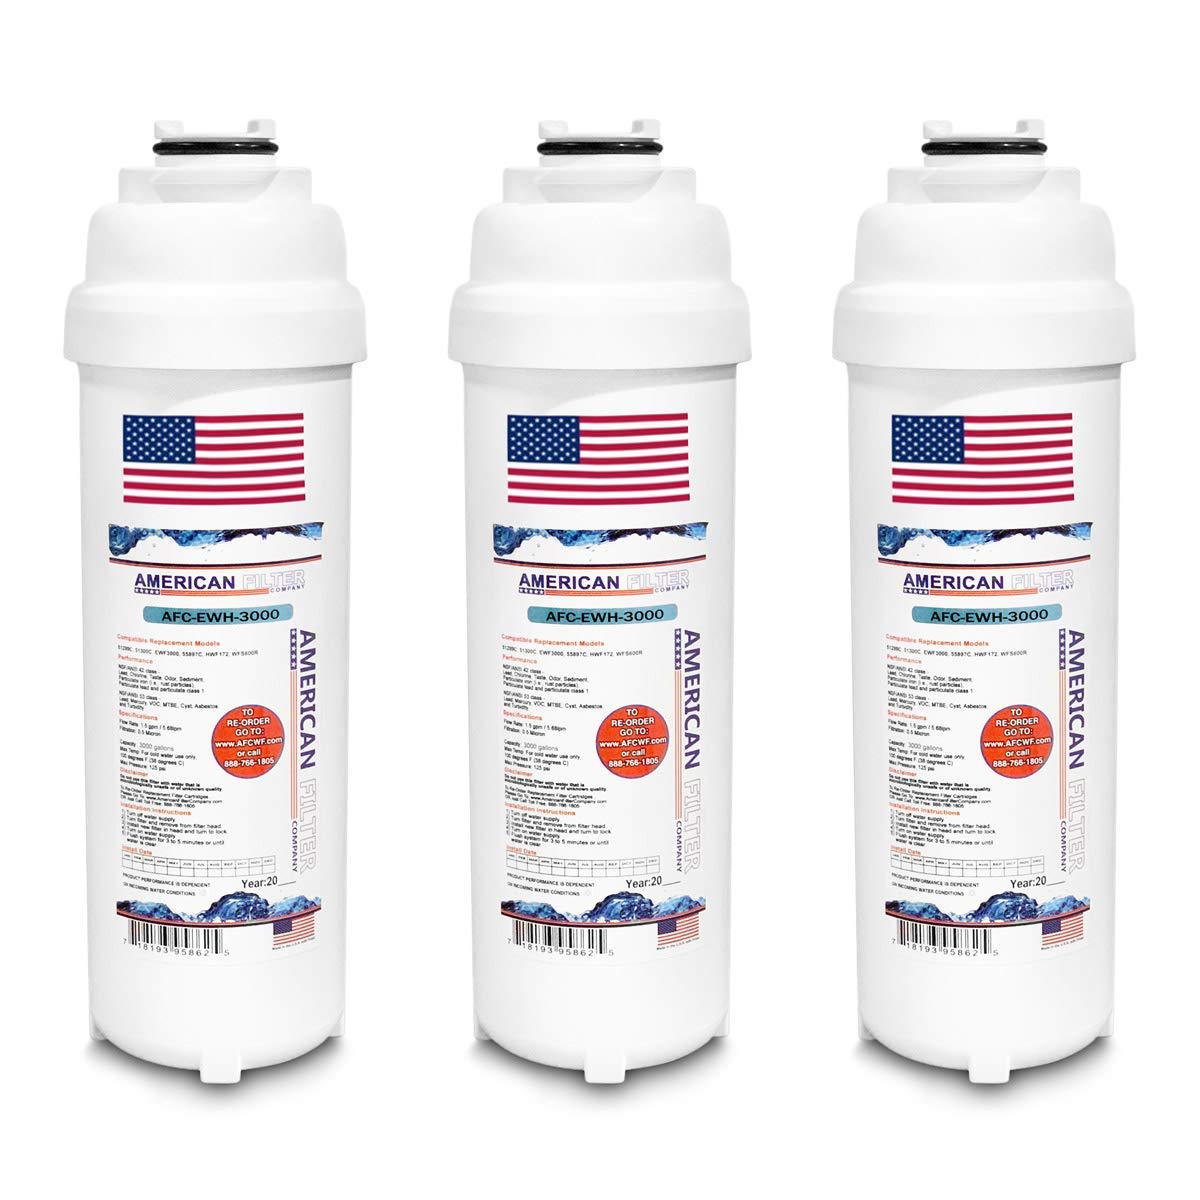 american filter company brand water filters afc-ewh-3000 comparable with water fountain filters ewf3000 ((3 - filters) )